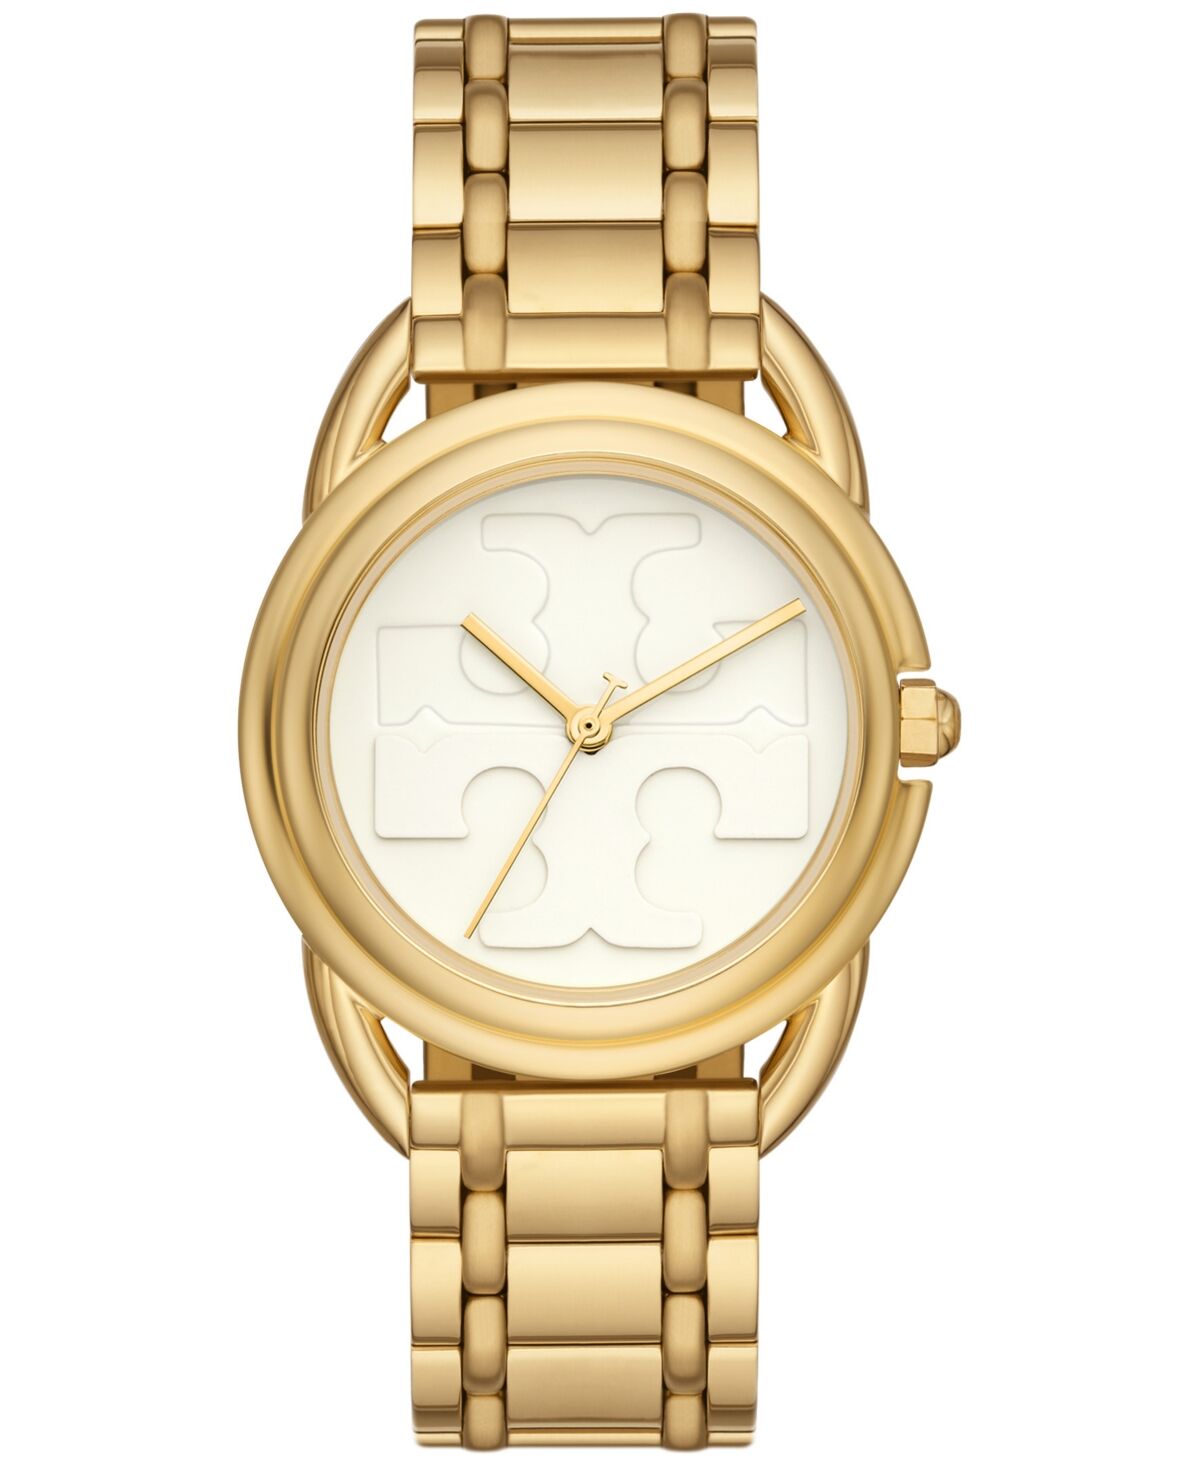 Tory Burch Women's The Miller Gold-Tone Stainless Steel Bracelet Watch 32mm - Gold